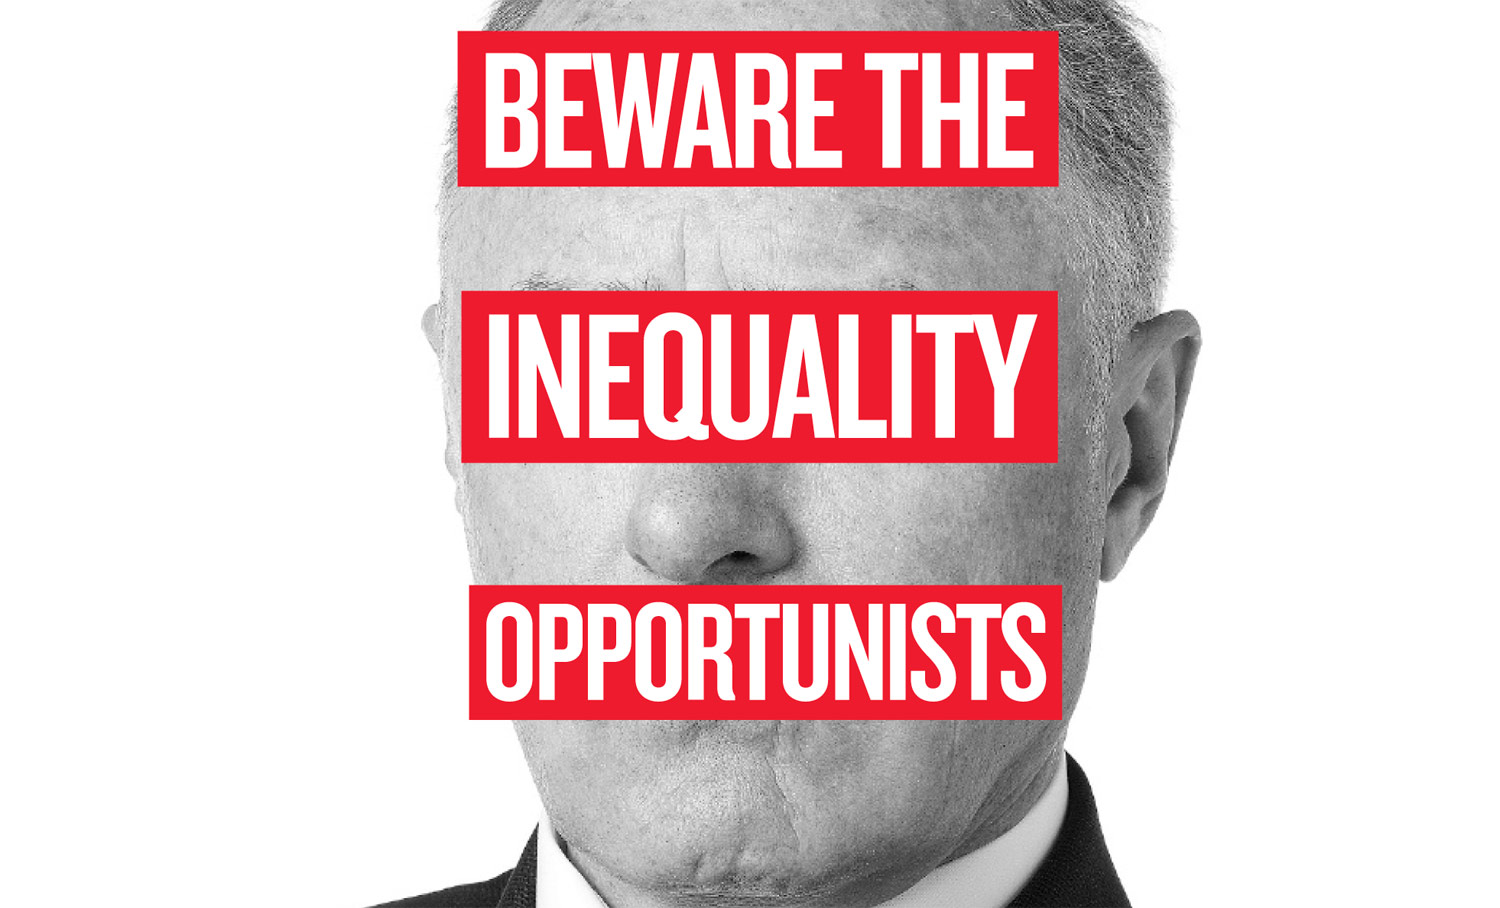 Will Phony Populists Hijack the Fight Against Inequality?